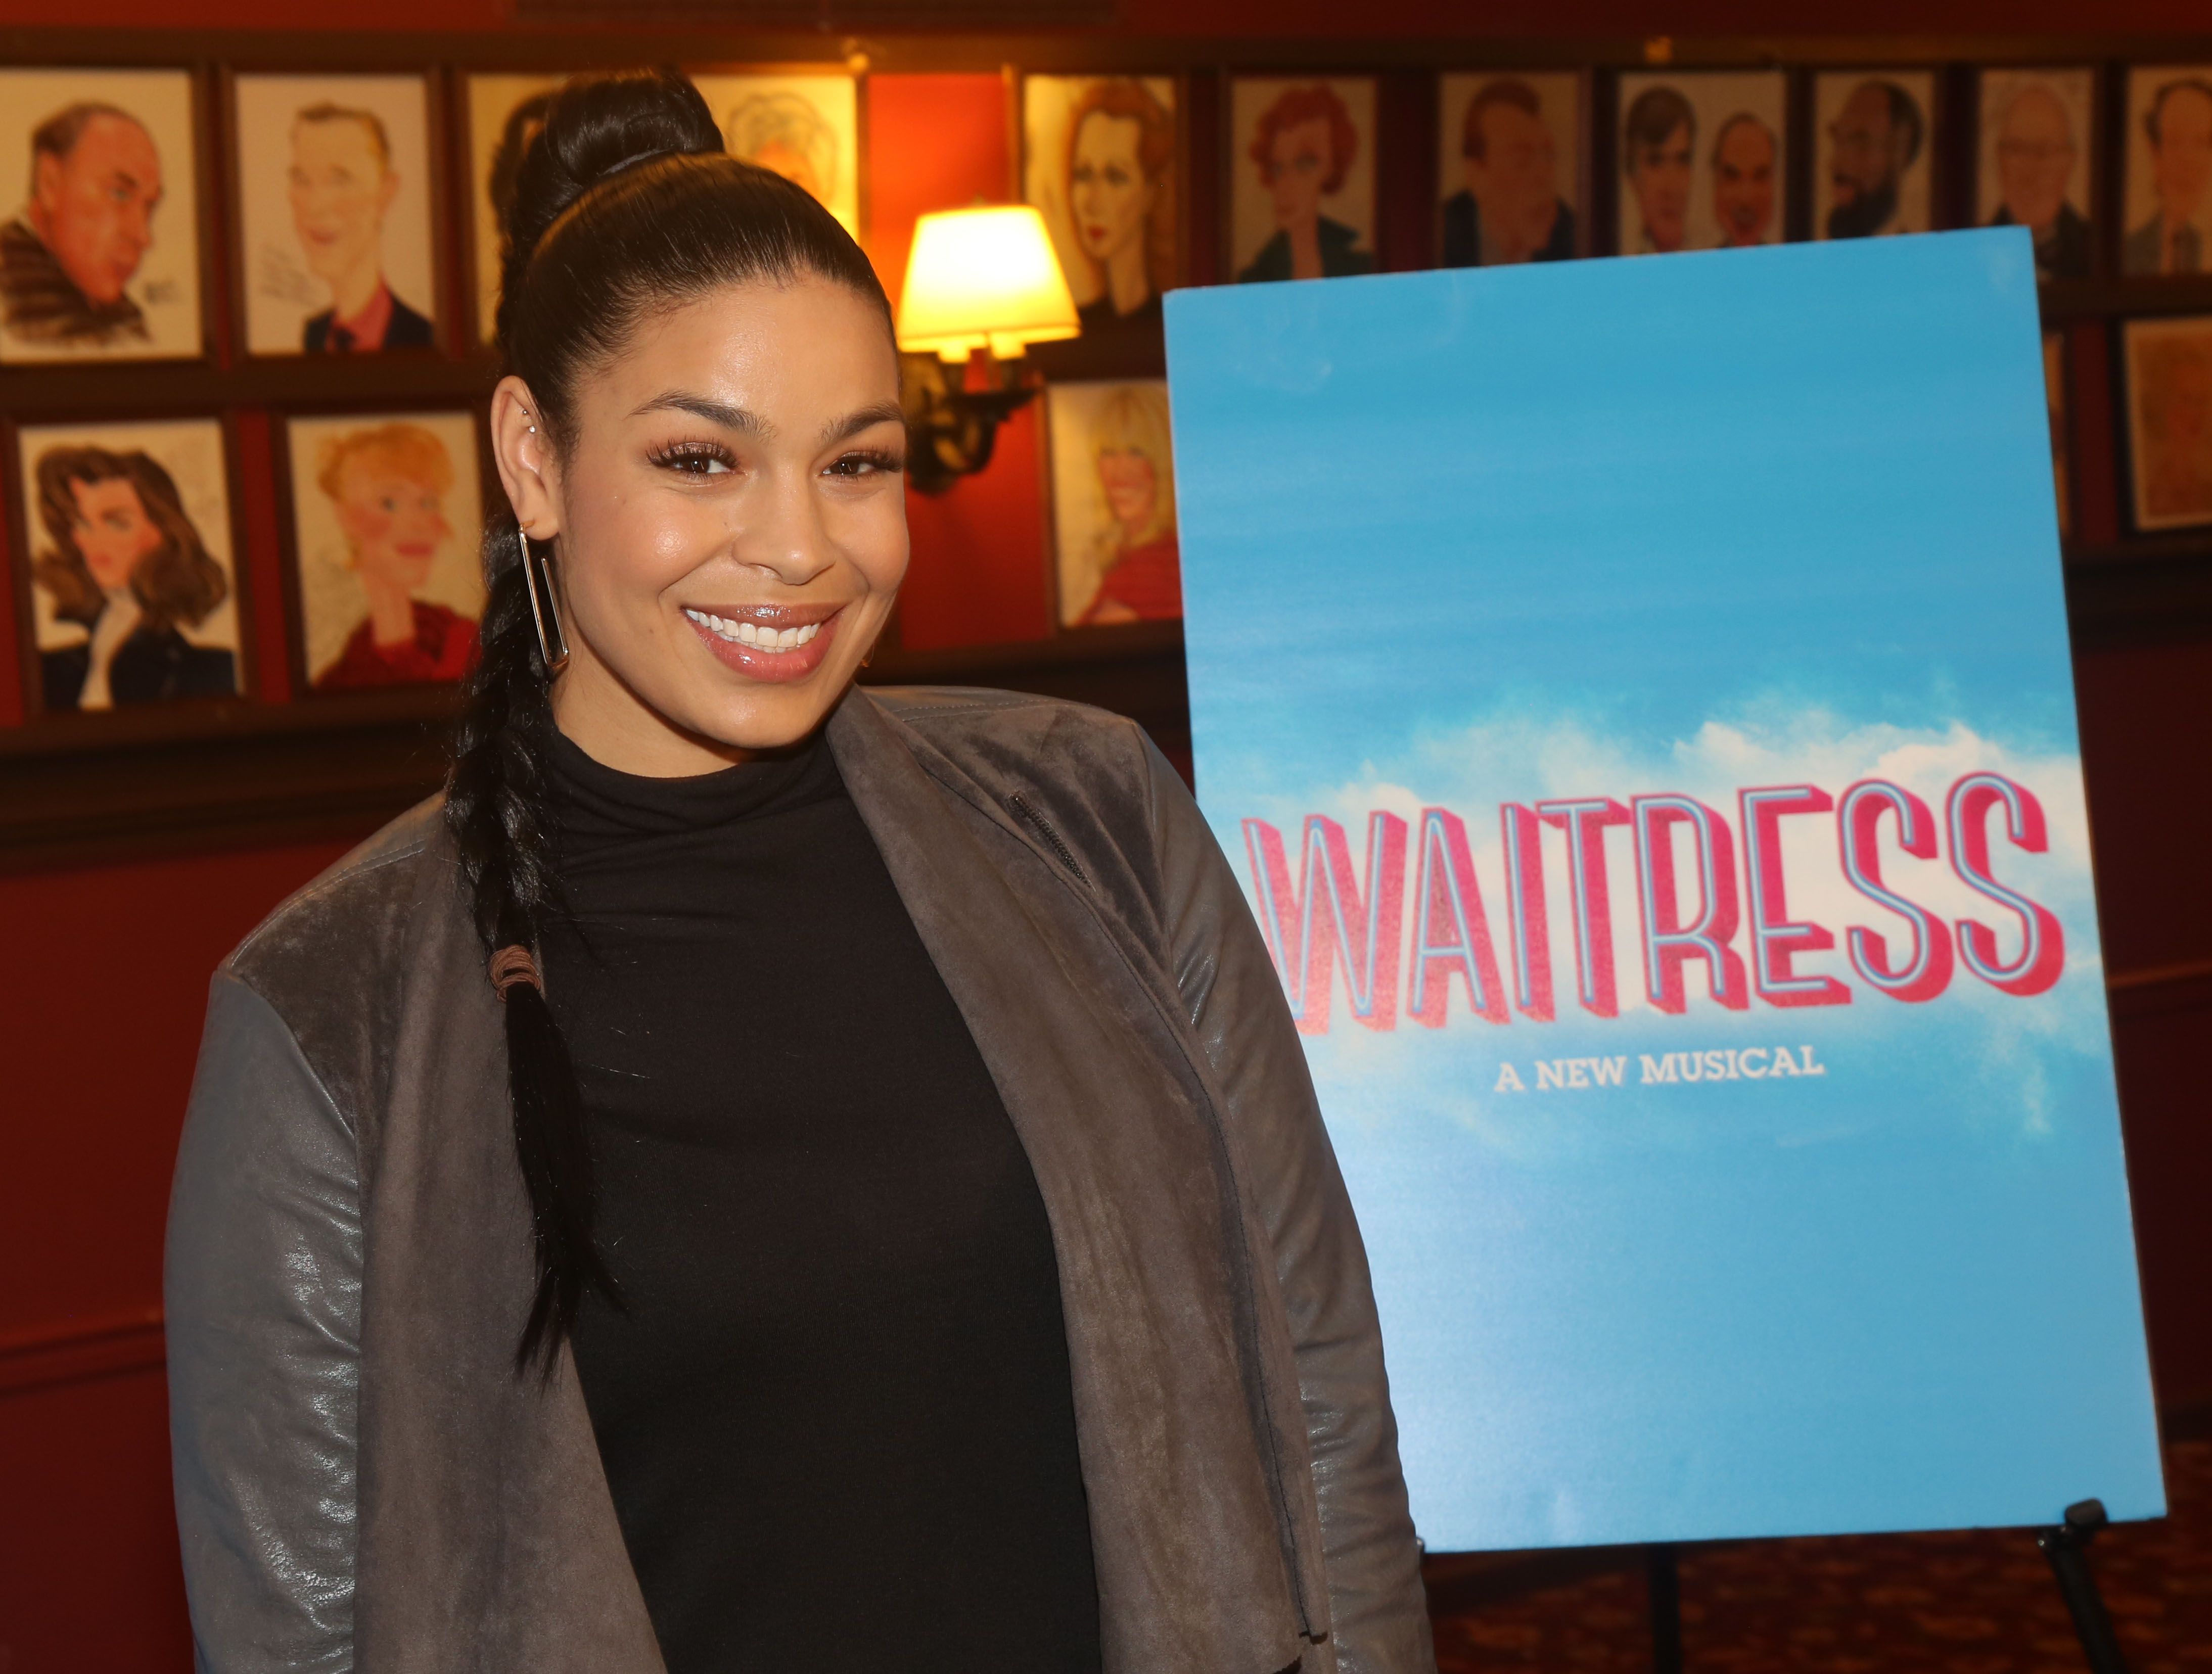 Jordin Sparks poses at a press photo call as she joins the cast of "Waitress" on Broadway at Sardi's on September 10, 2019 | Photo: Getty Images